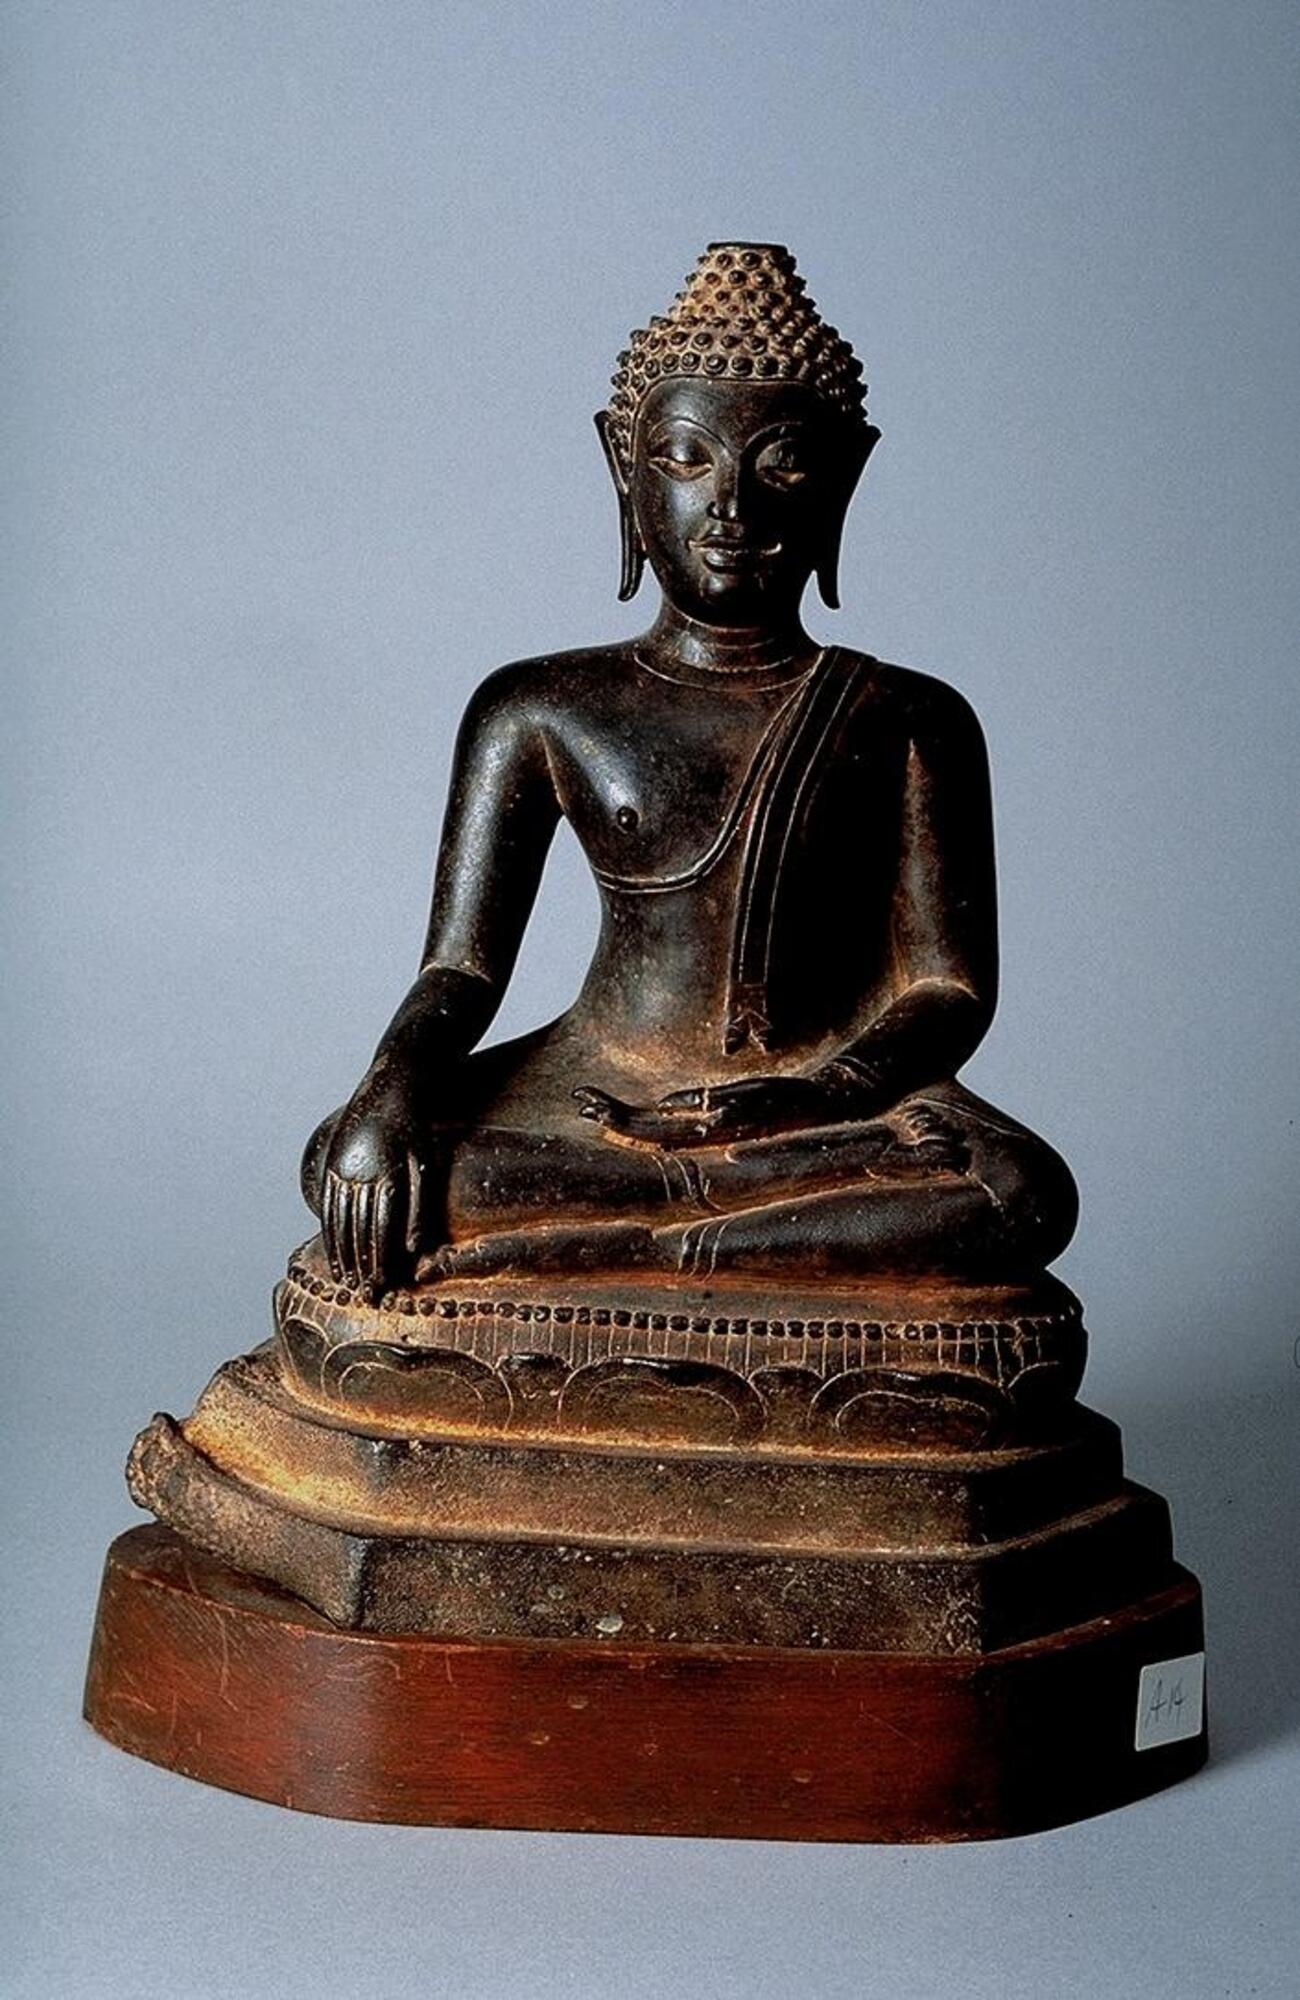 The Buddha in bhumisparsa mudra (the gesture of touching the earth with his right hand, palm inward), signaling his victory over Mara. In Southeast Asian contexts, this hand gesture is often referred to as Maravijaya mudra, or &quot;victory over Mara.&quot; The Buddha&rsquo;s elongated earlobes refer to his early life as a prince, when he wore heavy earrings. Texts that describe how a Buddha&rsquo;s face should look often use comparisons to natural forms such as eyes like lotus petals, eyebrows like an archer&rsquo;s bow, and a chin like a mango stone. The artist who created this sculpture clearly followed similar instructions.